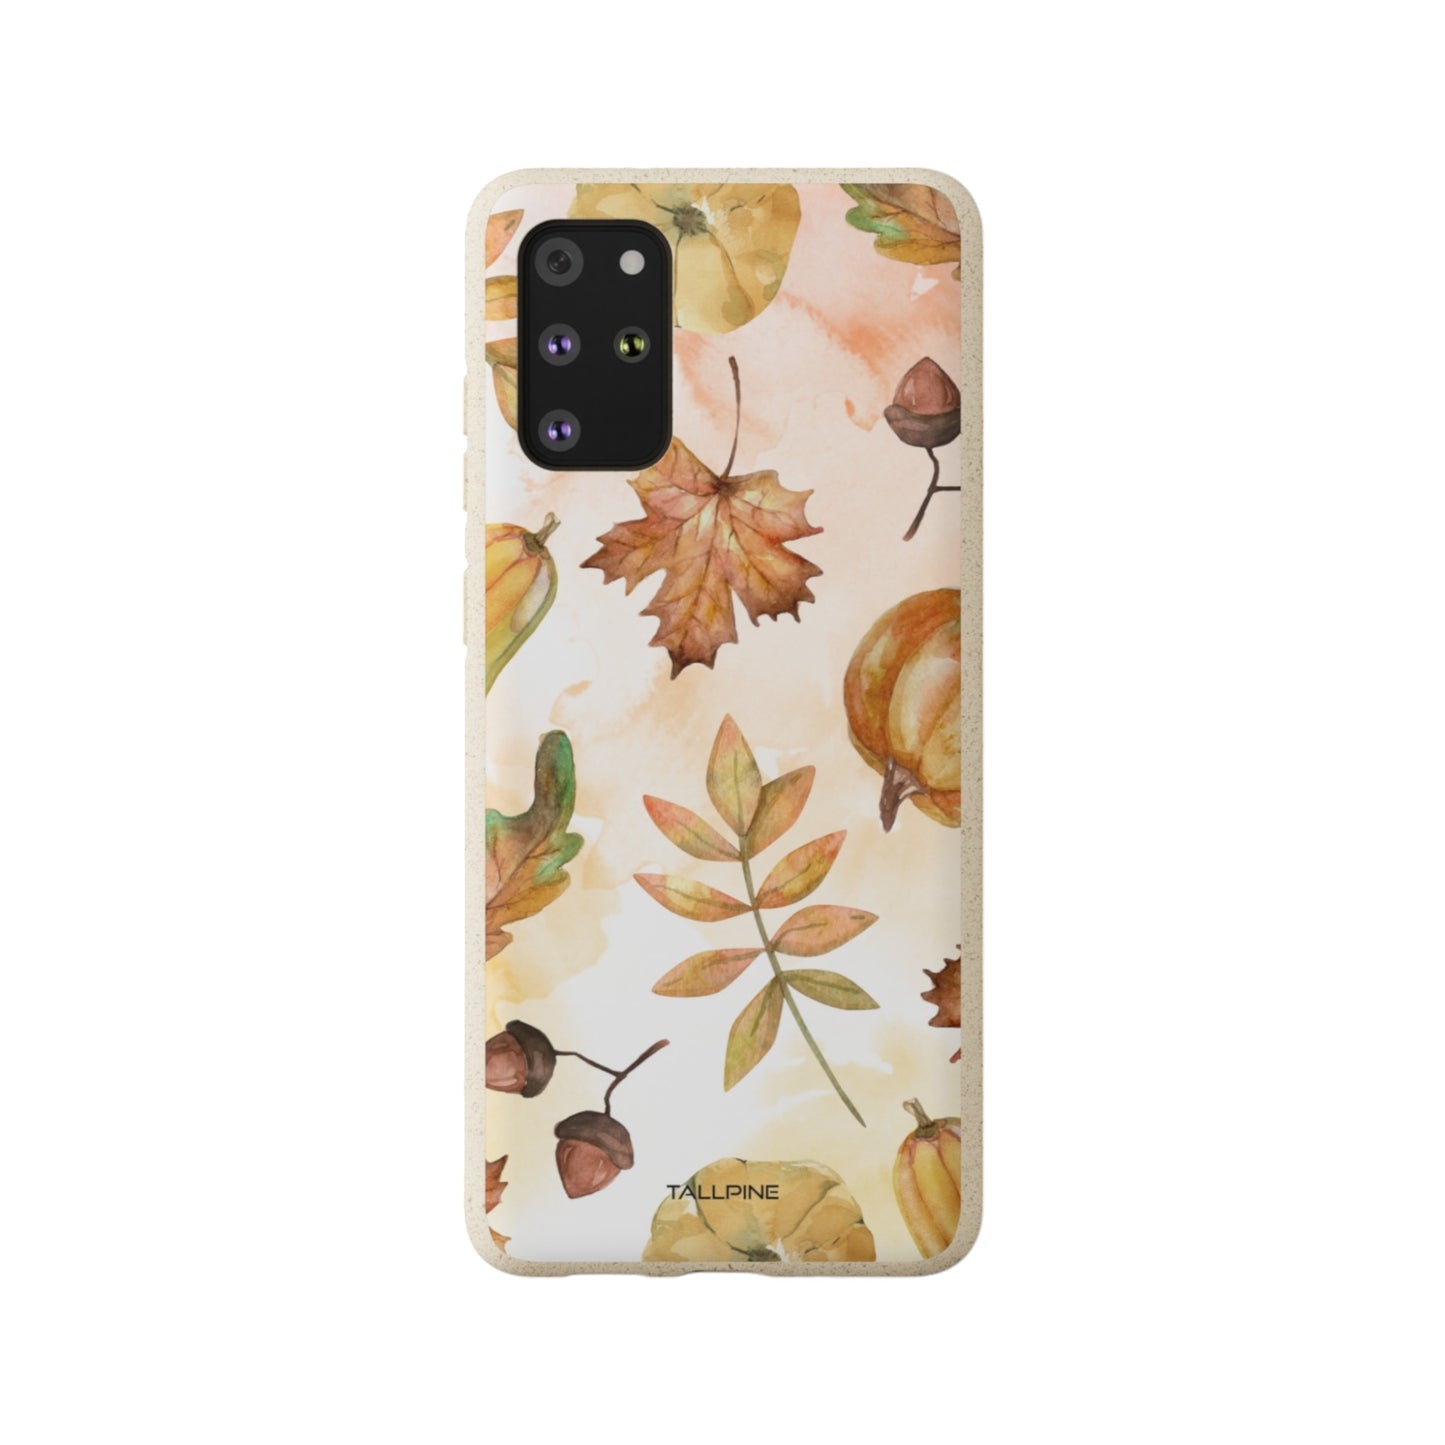 Autumn Harvest - Eco Case Samsung Galaxy S20+ - Tallpine Cases | Sustainable and Eco-Friendly Phone Cases - autumn leaves nature New orange